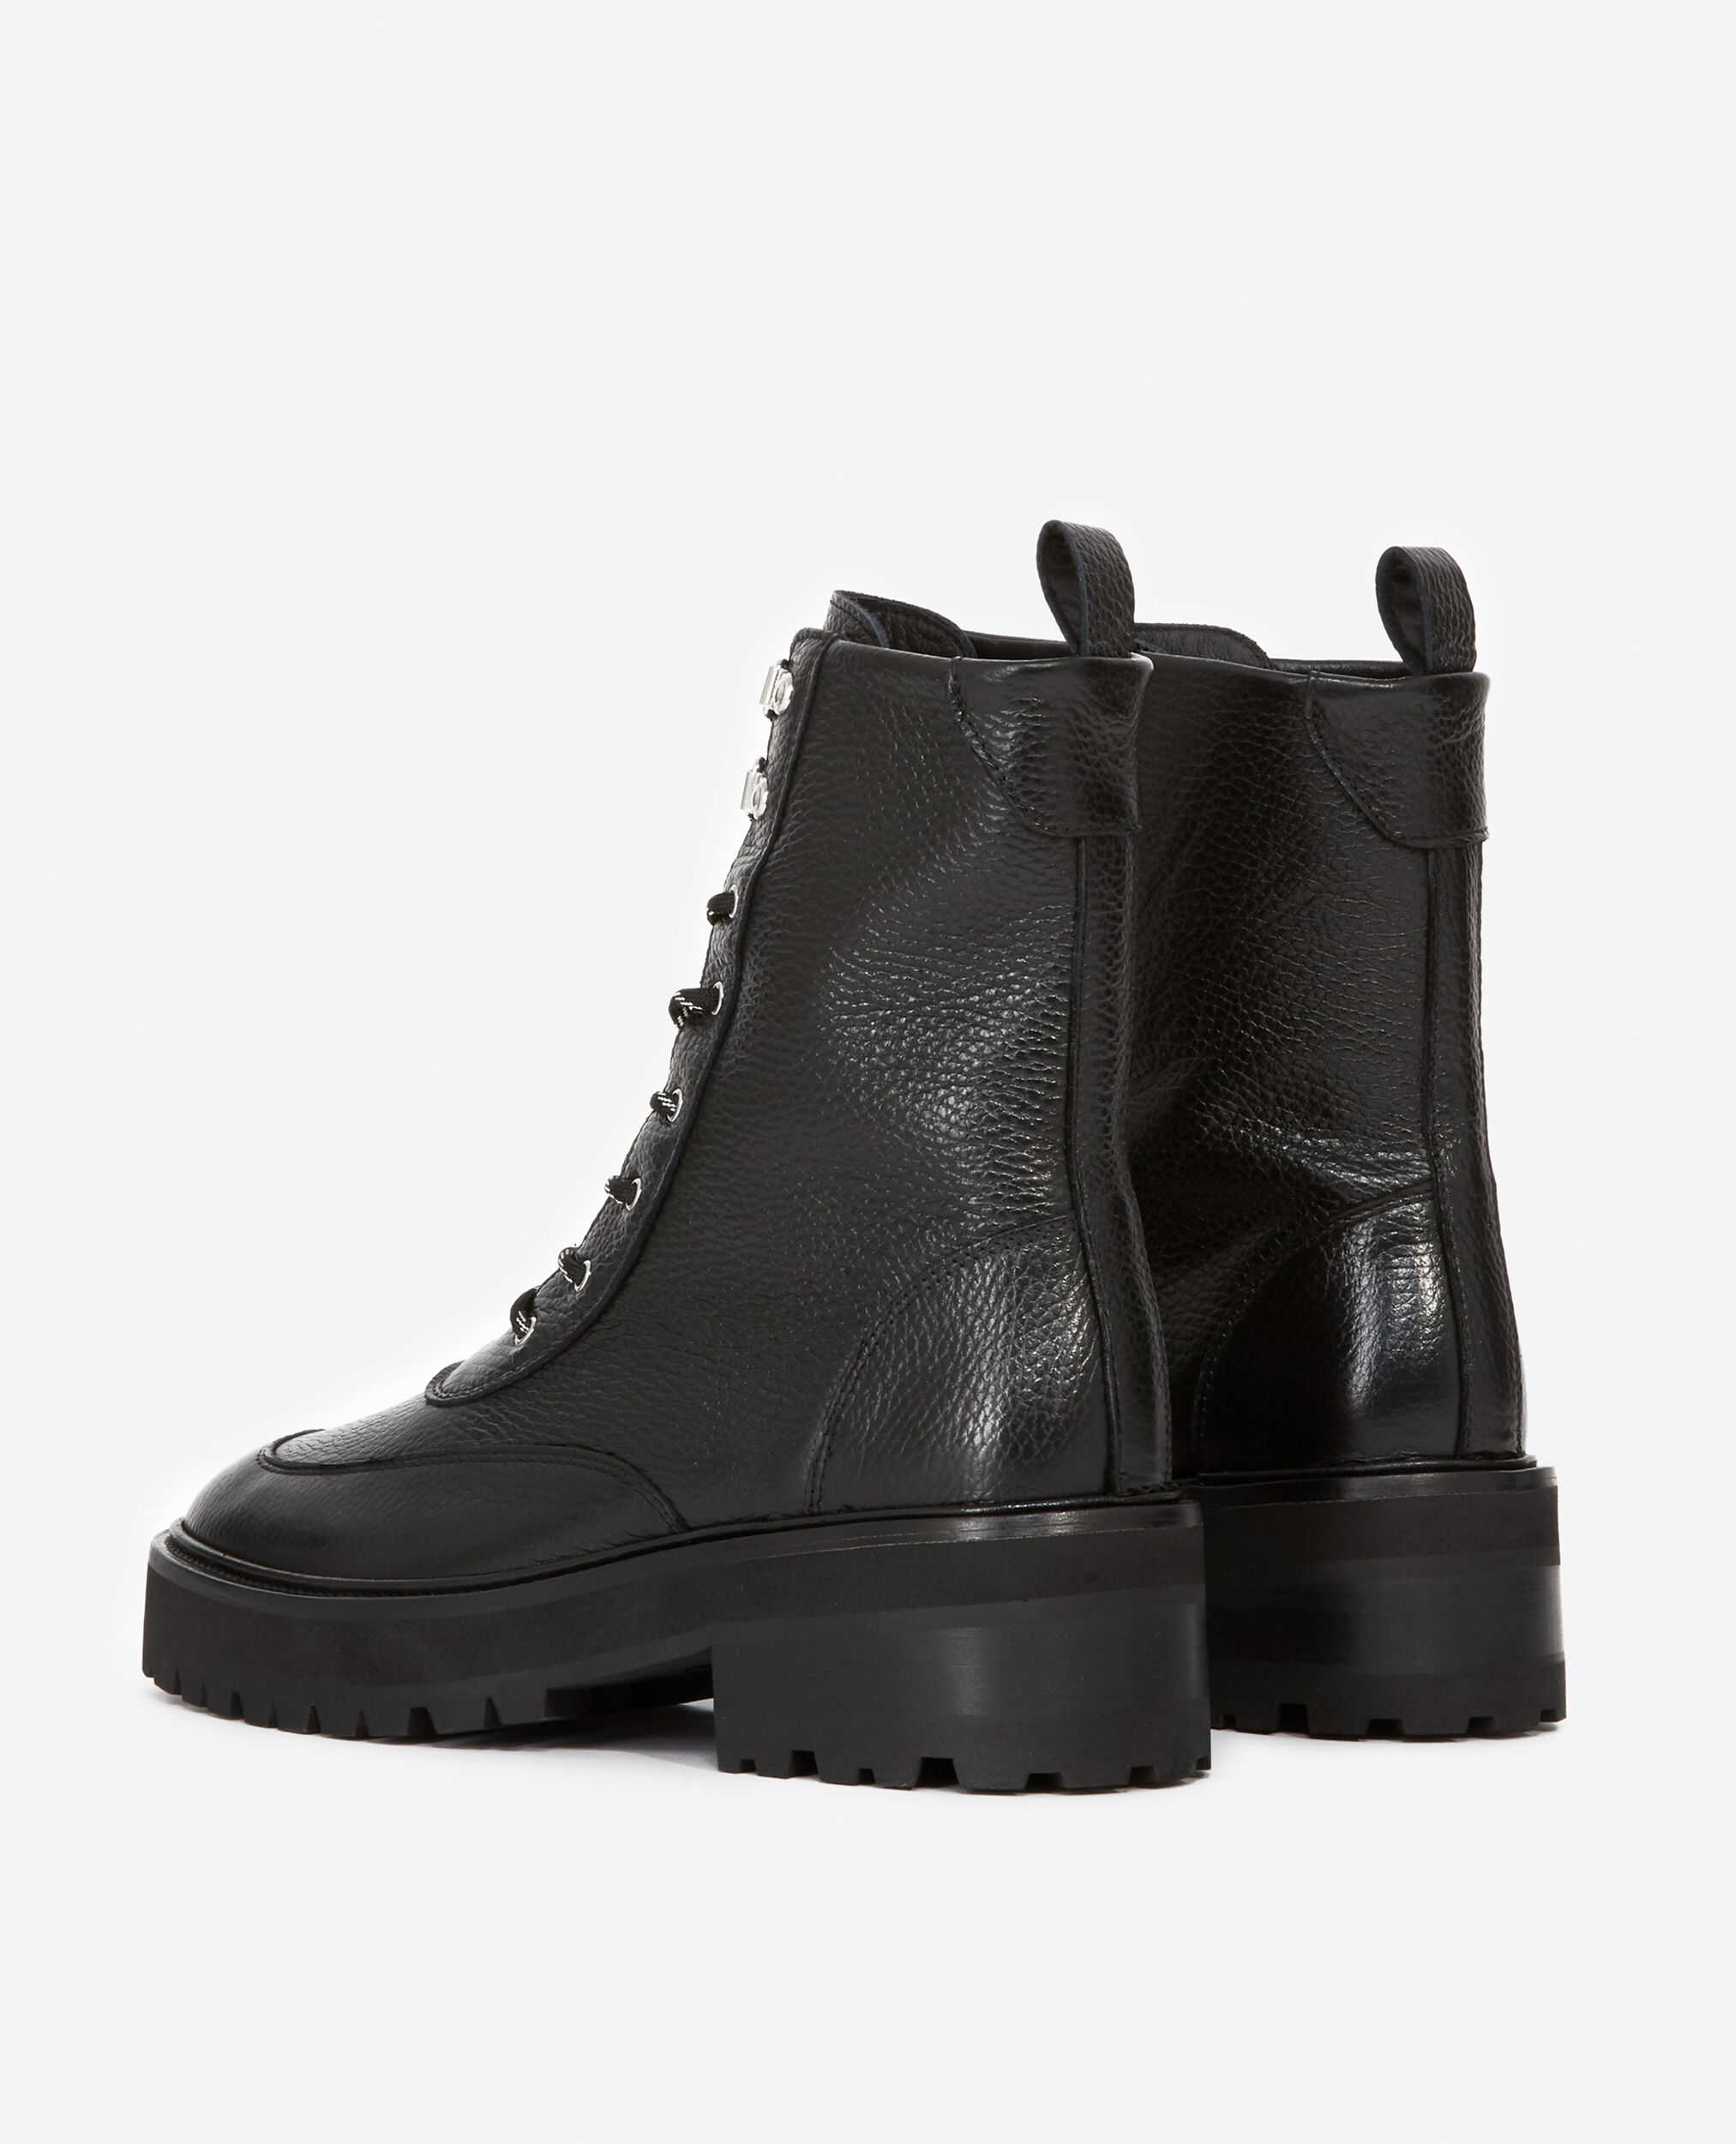 High black leather boots in ranger style, BLACK, hi-res image number null